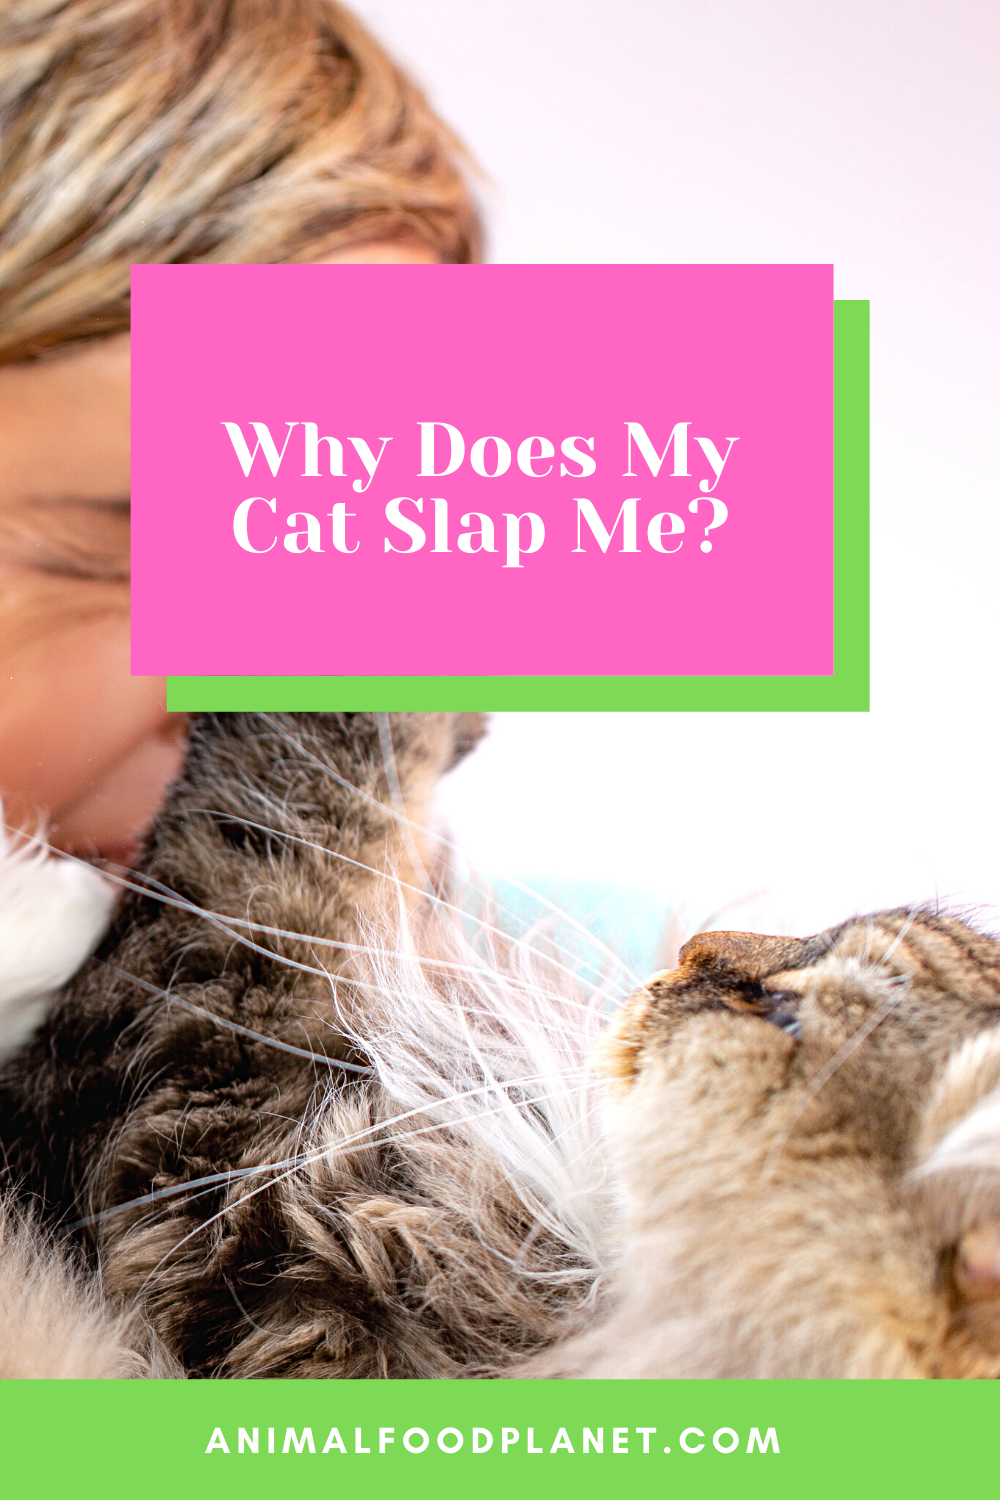 Why Does My Cat Slap Me